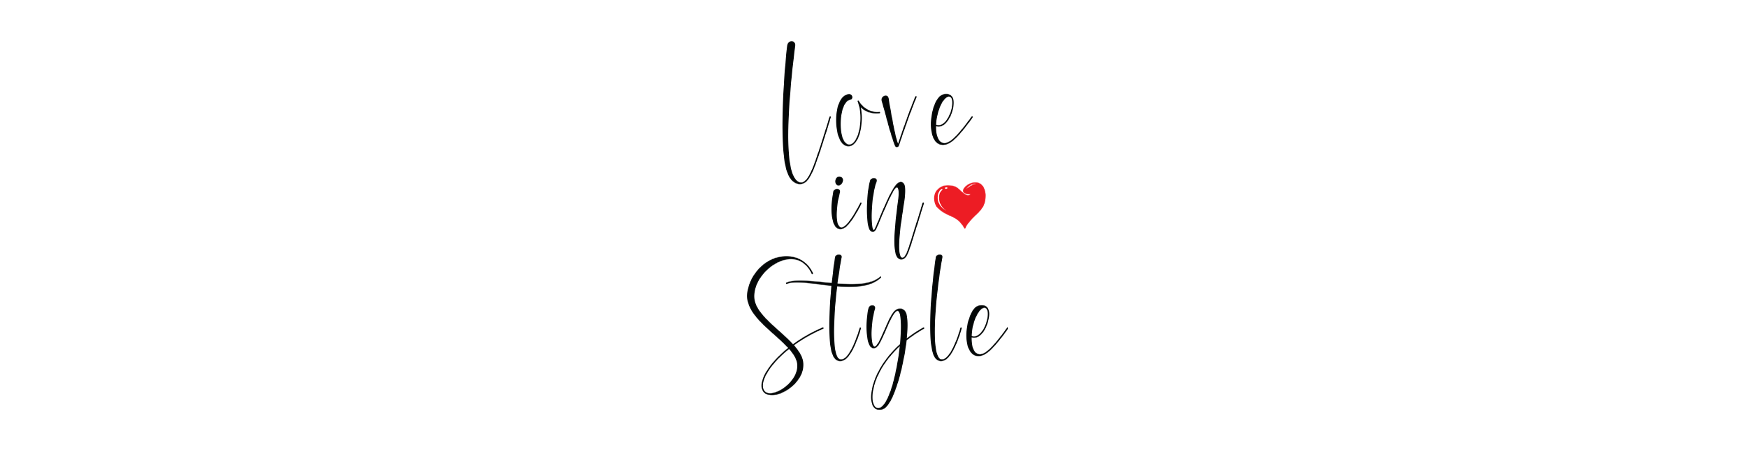 Love In Style